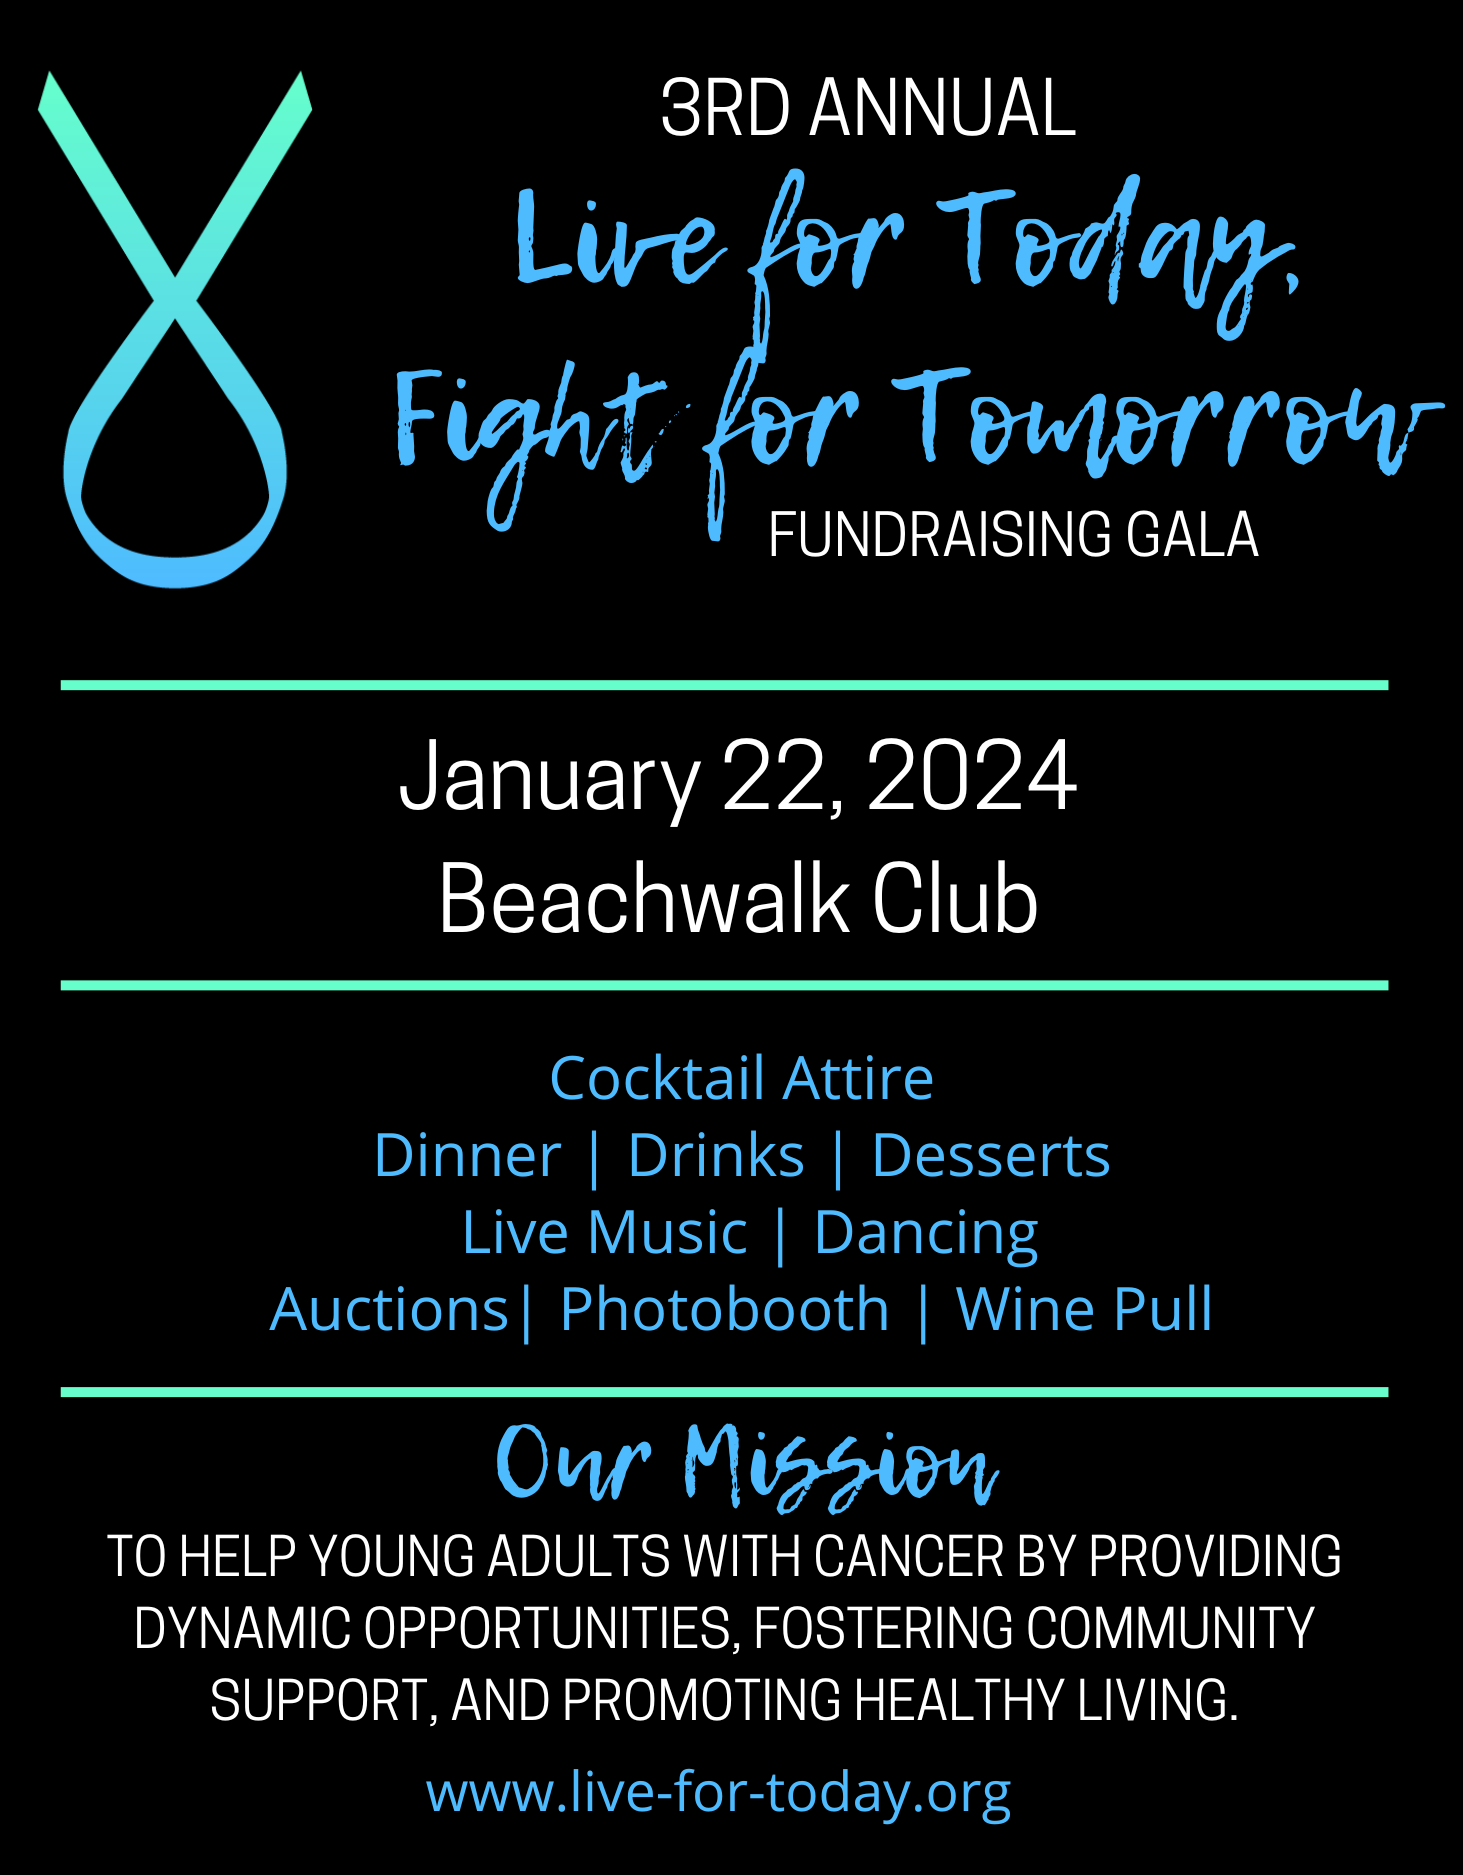 2024 Live for Today, Fight for Tomorrow Gala | Live For Today Foundation  Live For Today Foundation | Focus on living, not cancer.